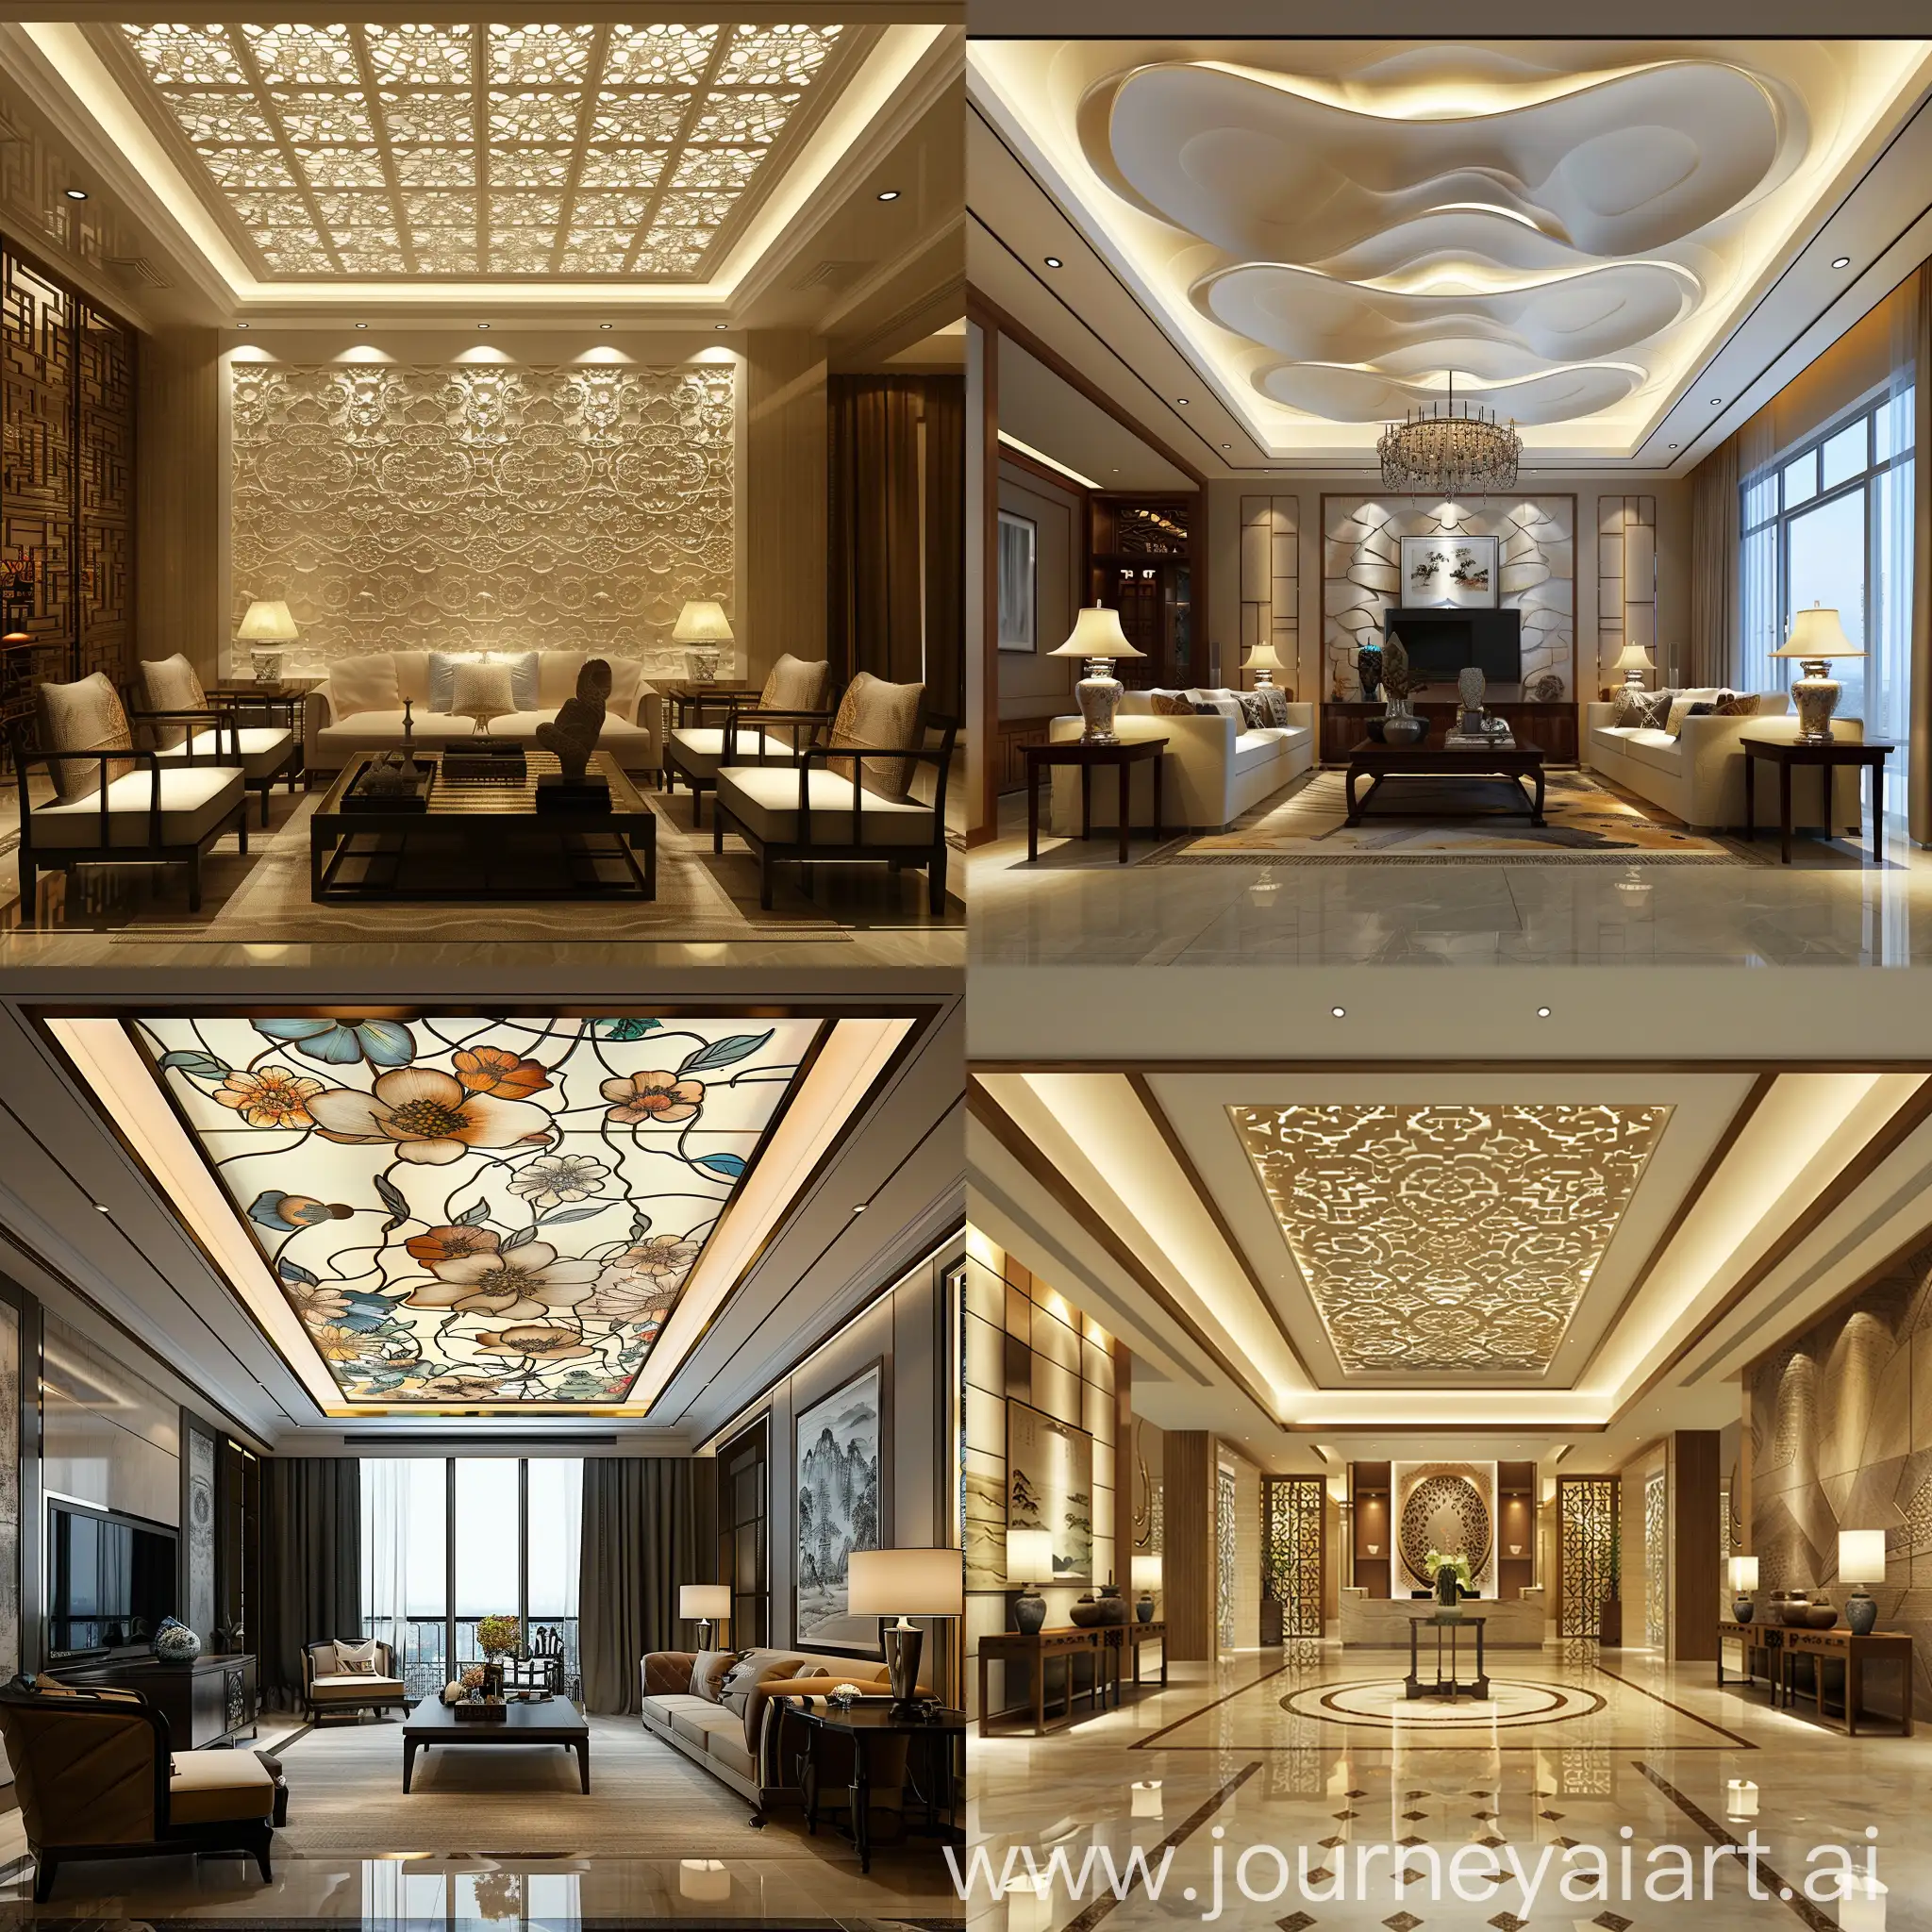 Chinese-Gypsum-Ceiling-Design-Intricate-and-Attractive-Decor-for-Modern-Spaces